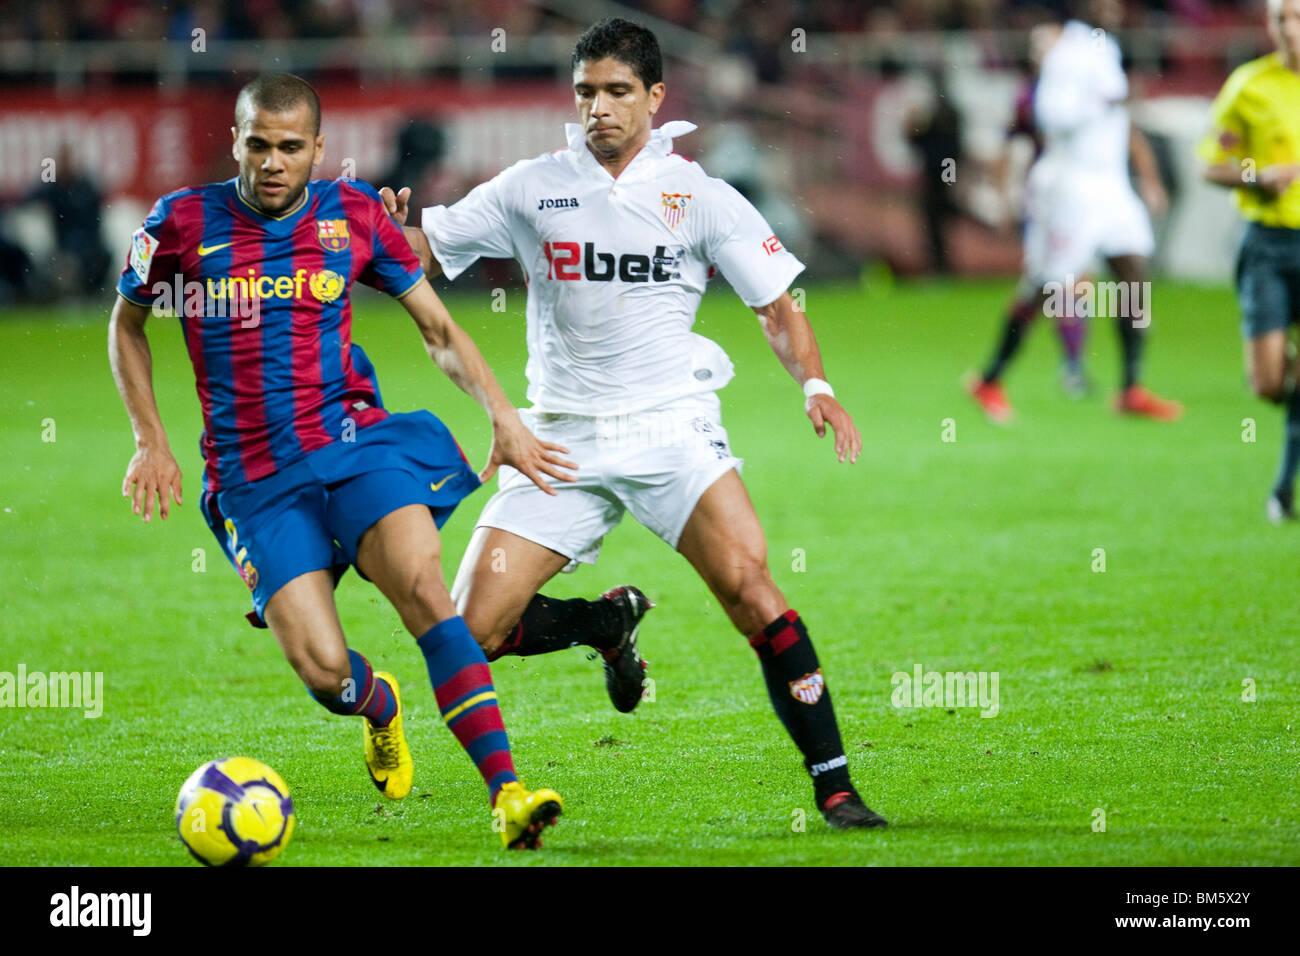 Daniel Alves with the ball pursued by Renato. Stock Photo